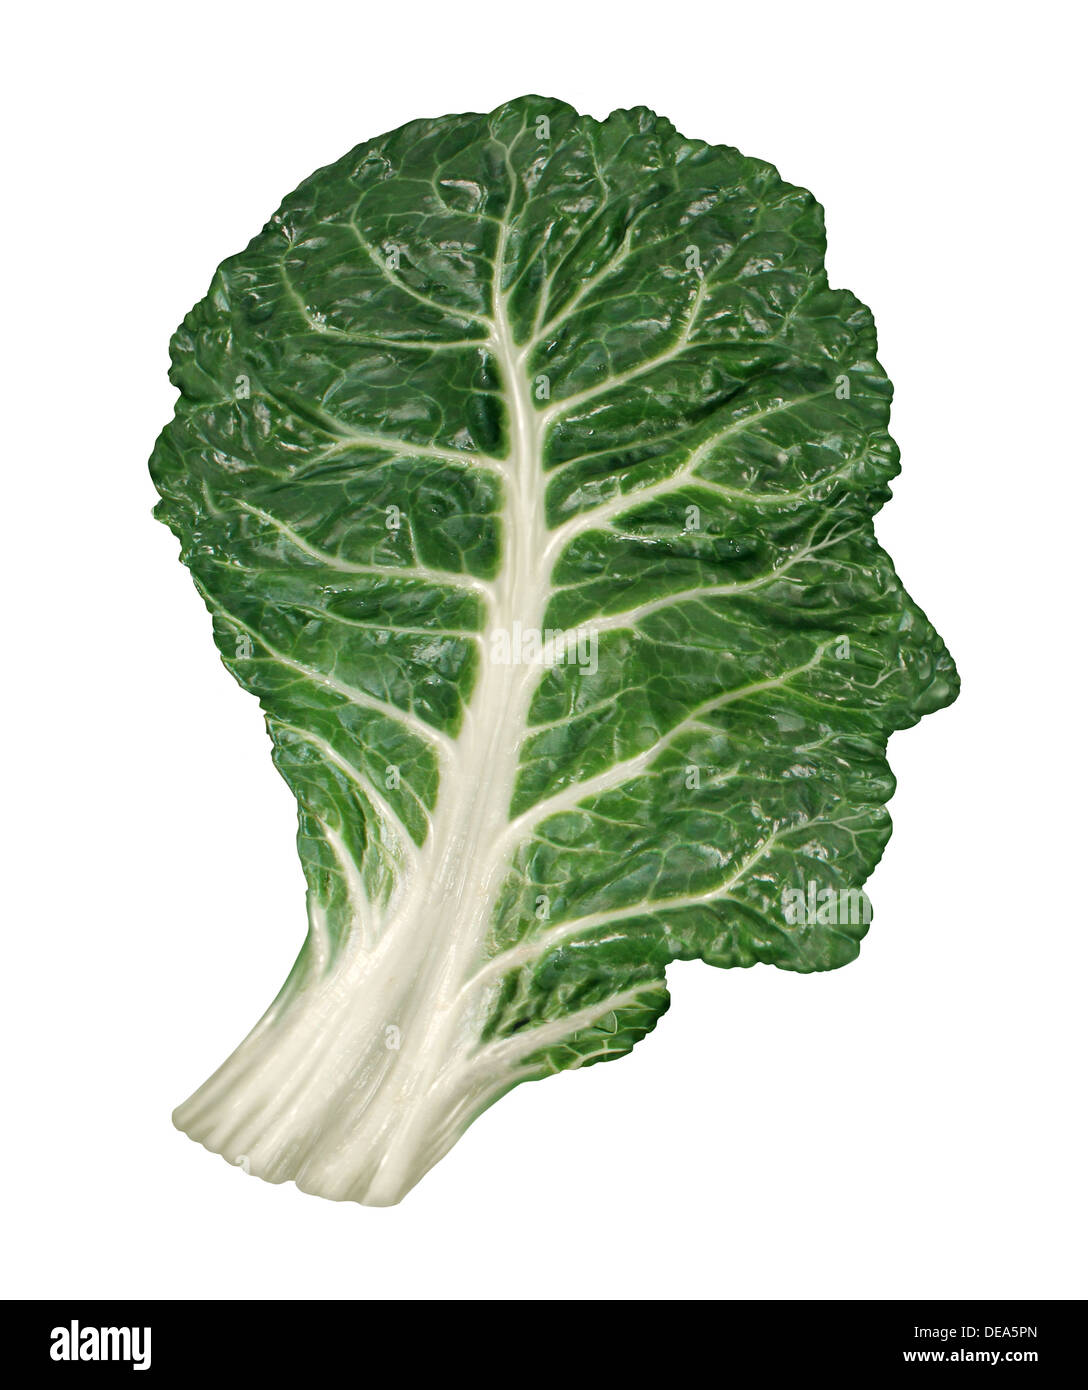 Human healthy diet concept with a dark green leafy kale or collard leaf in the shape of a head as a symbol of fresh vegetable eating and intelligent dieting using farm fresh natural organic produce from the local market. Stock Photo